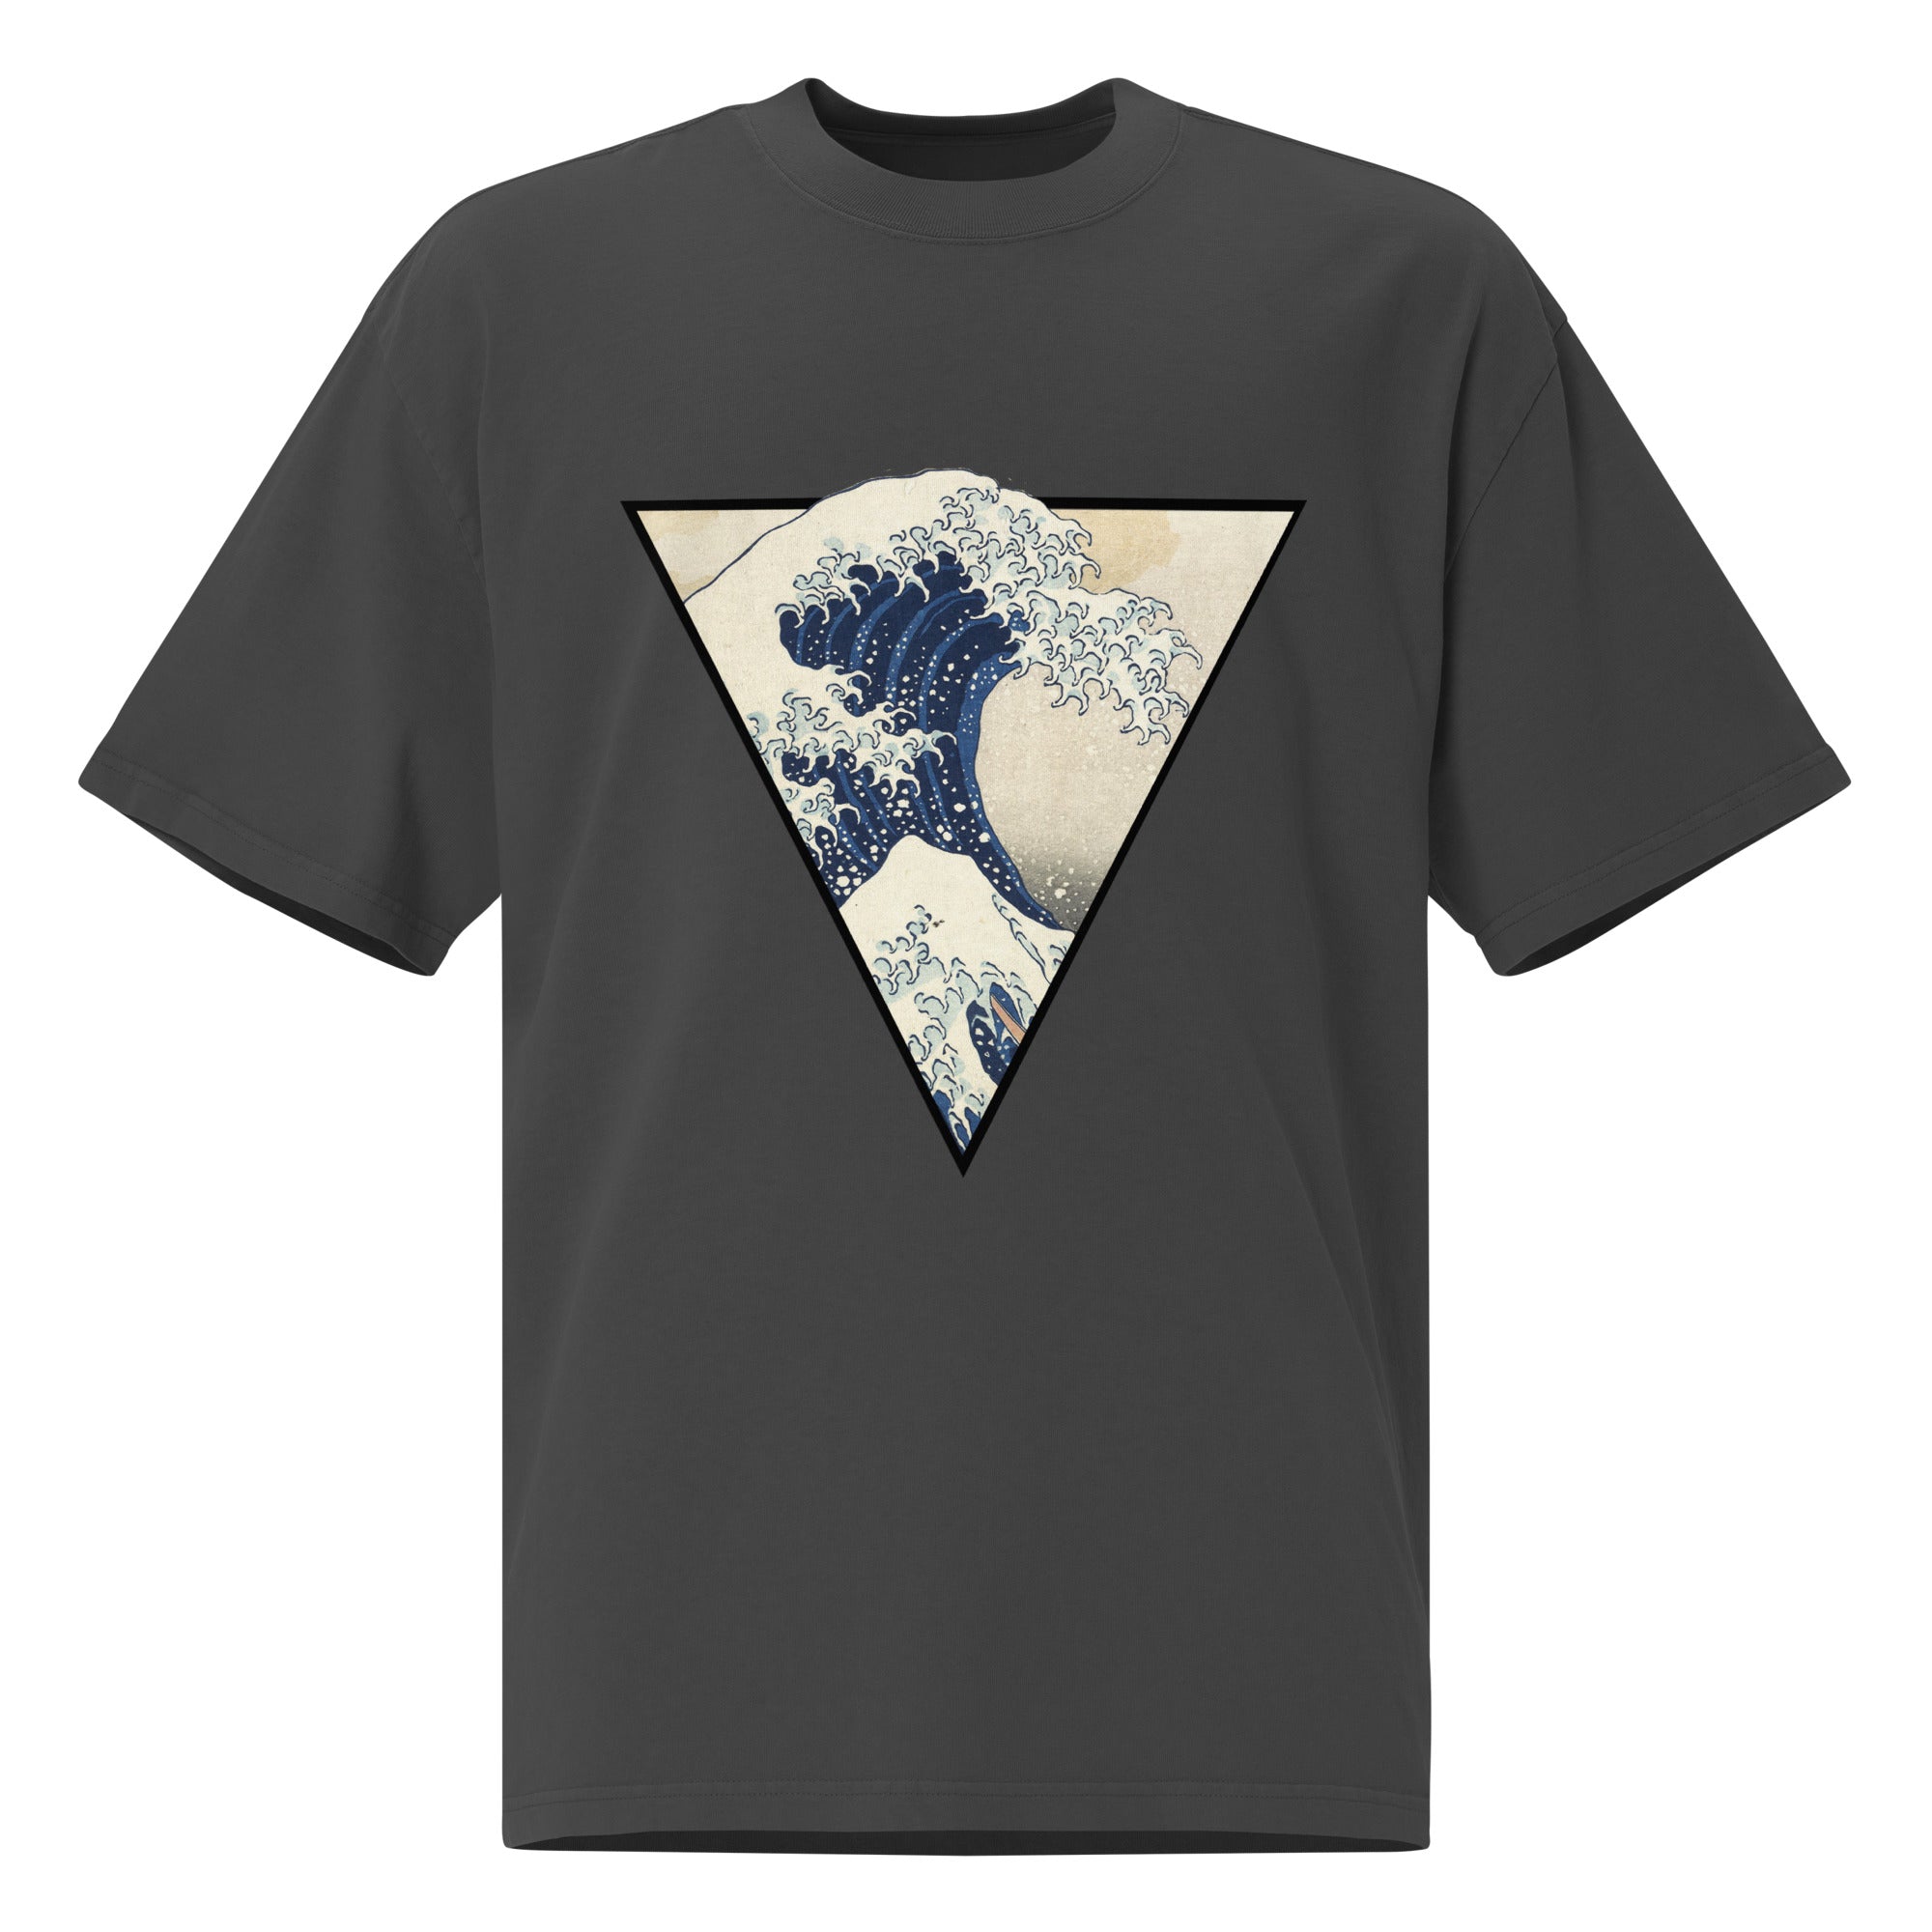 THE GREAT WAVE Unisex Oversized Faded T-Shirt - BONOTEE